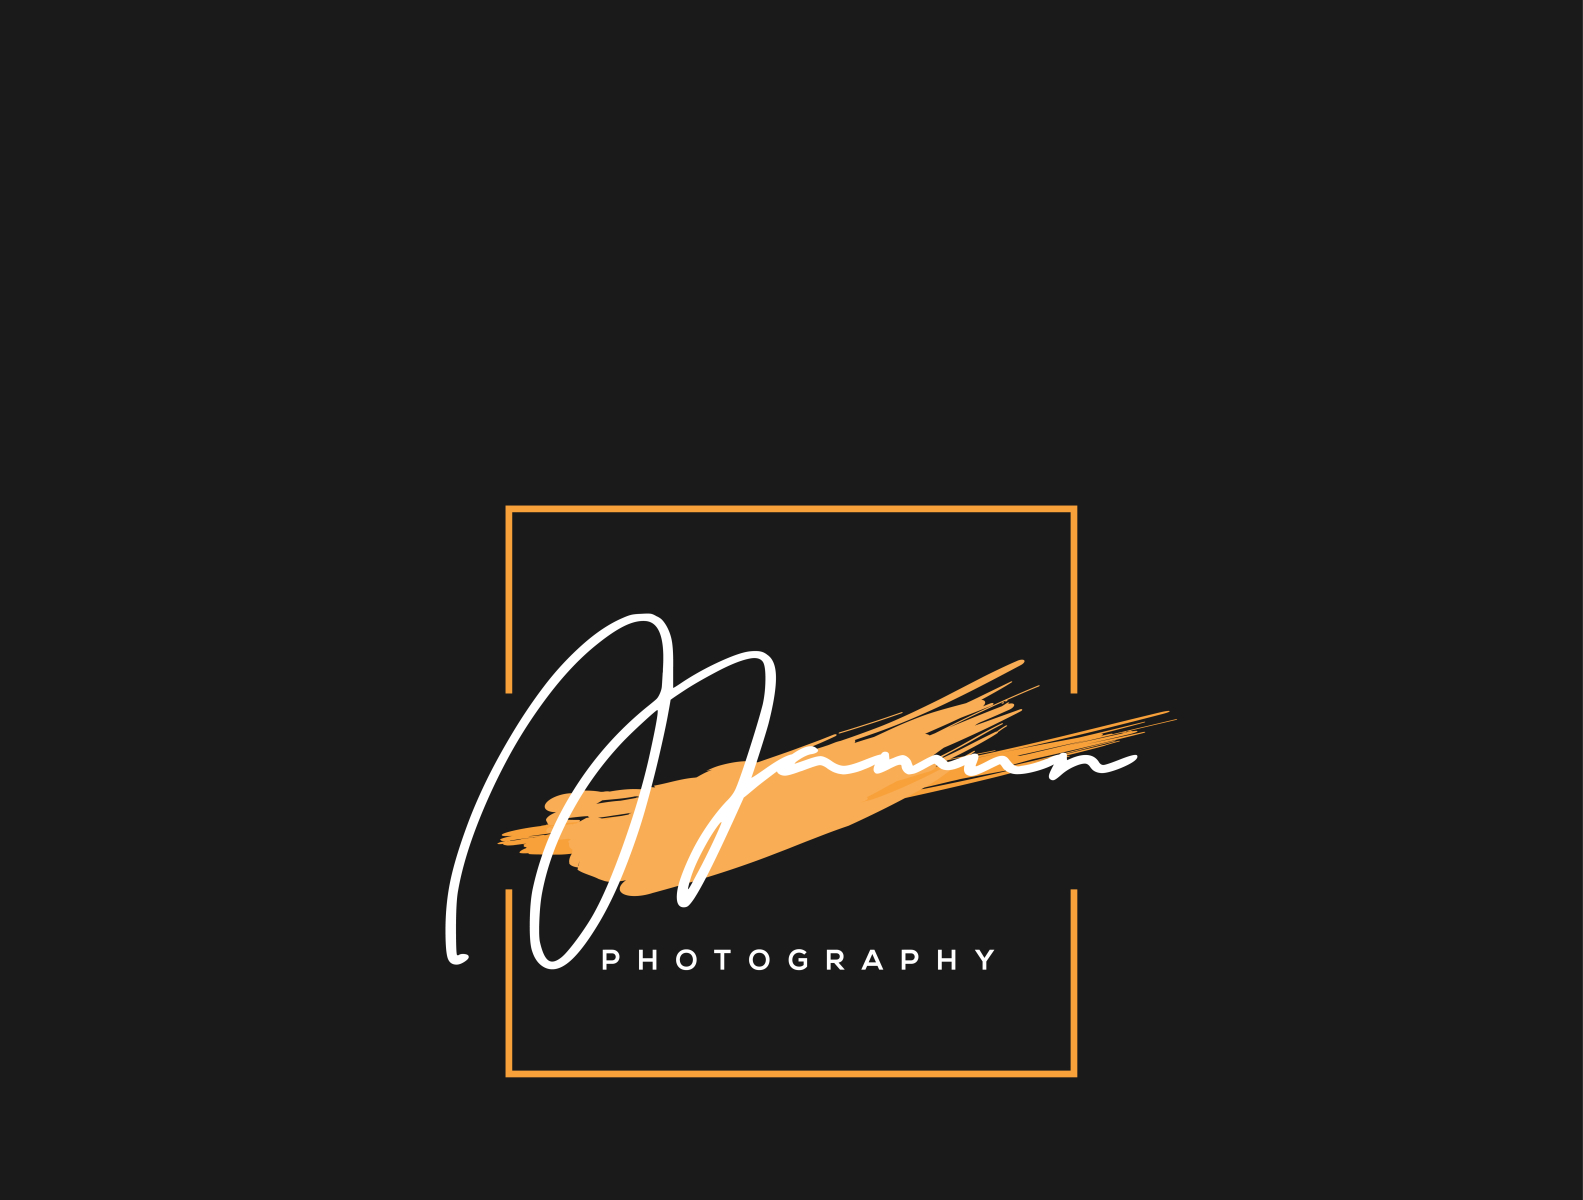 Photography Logo by Md.Mamun on Dribbble